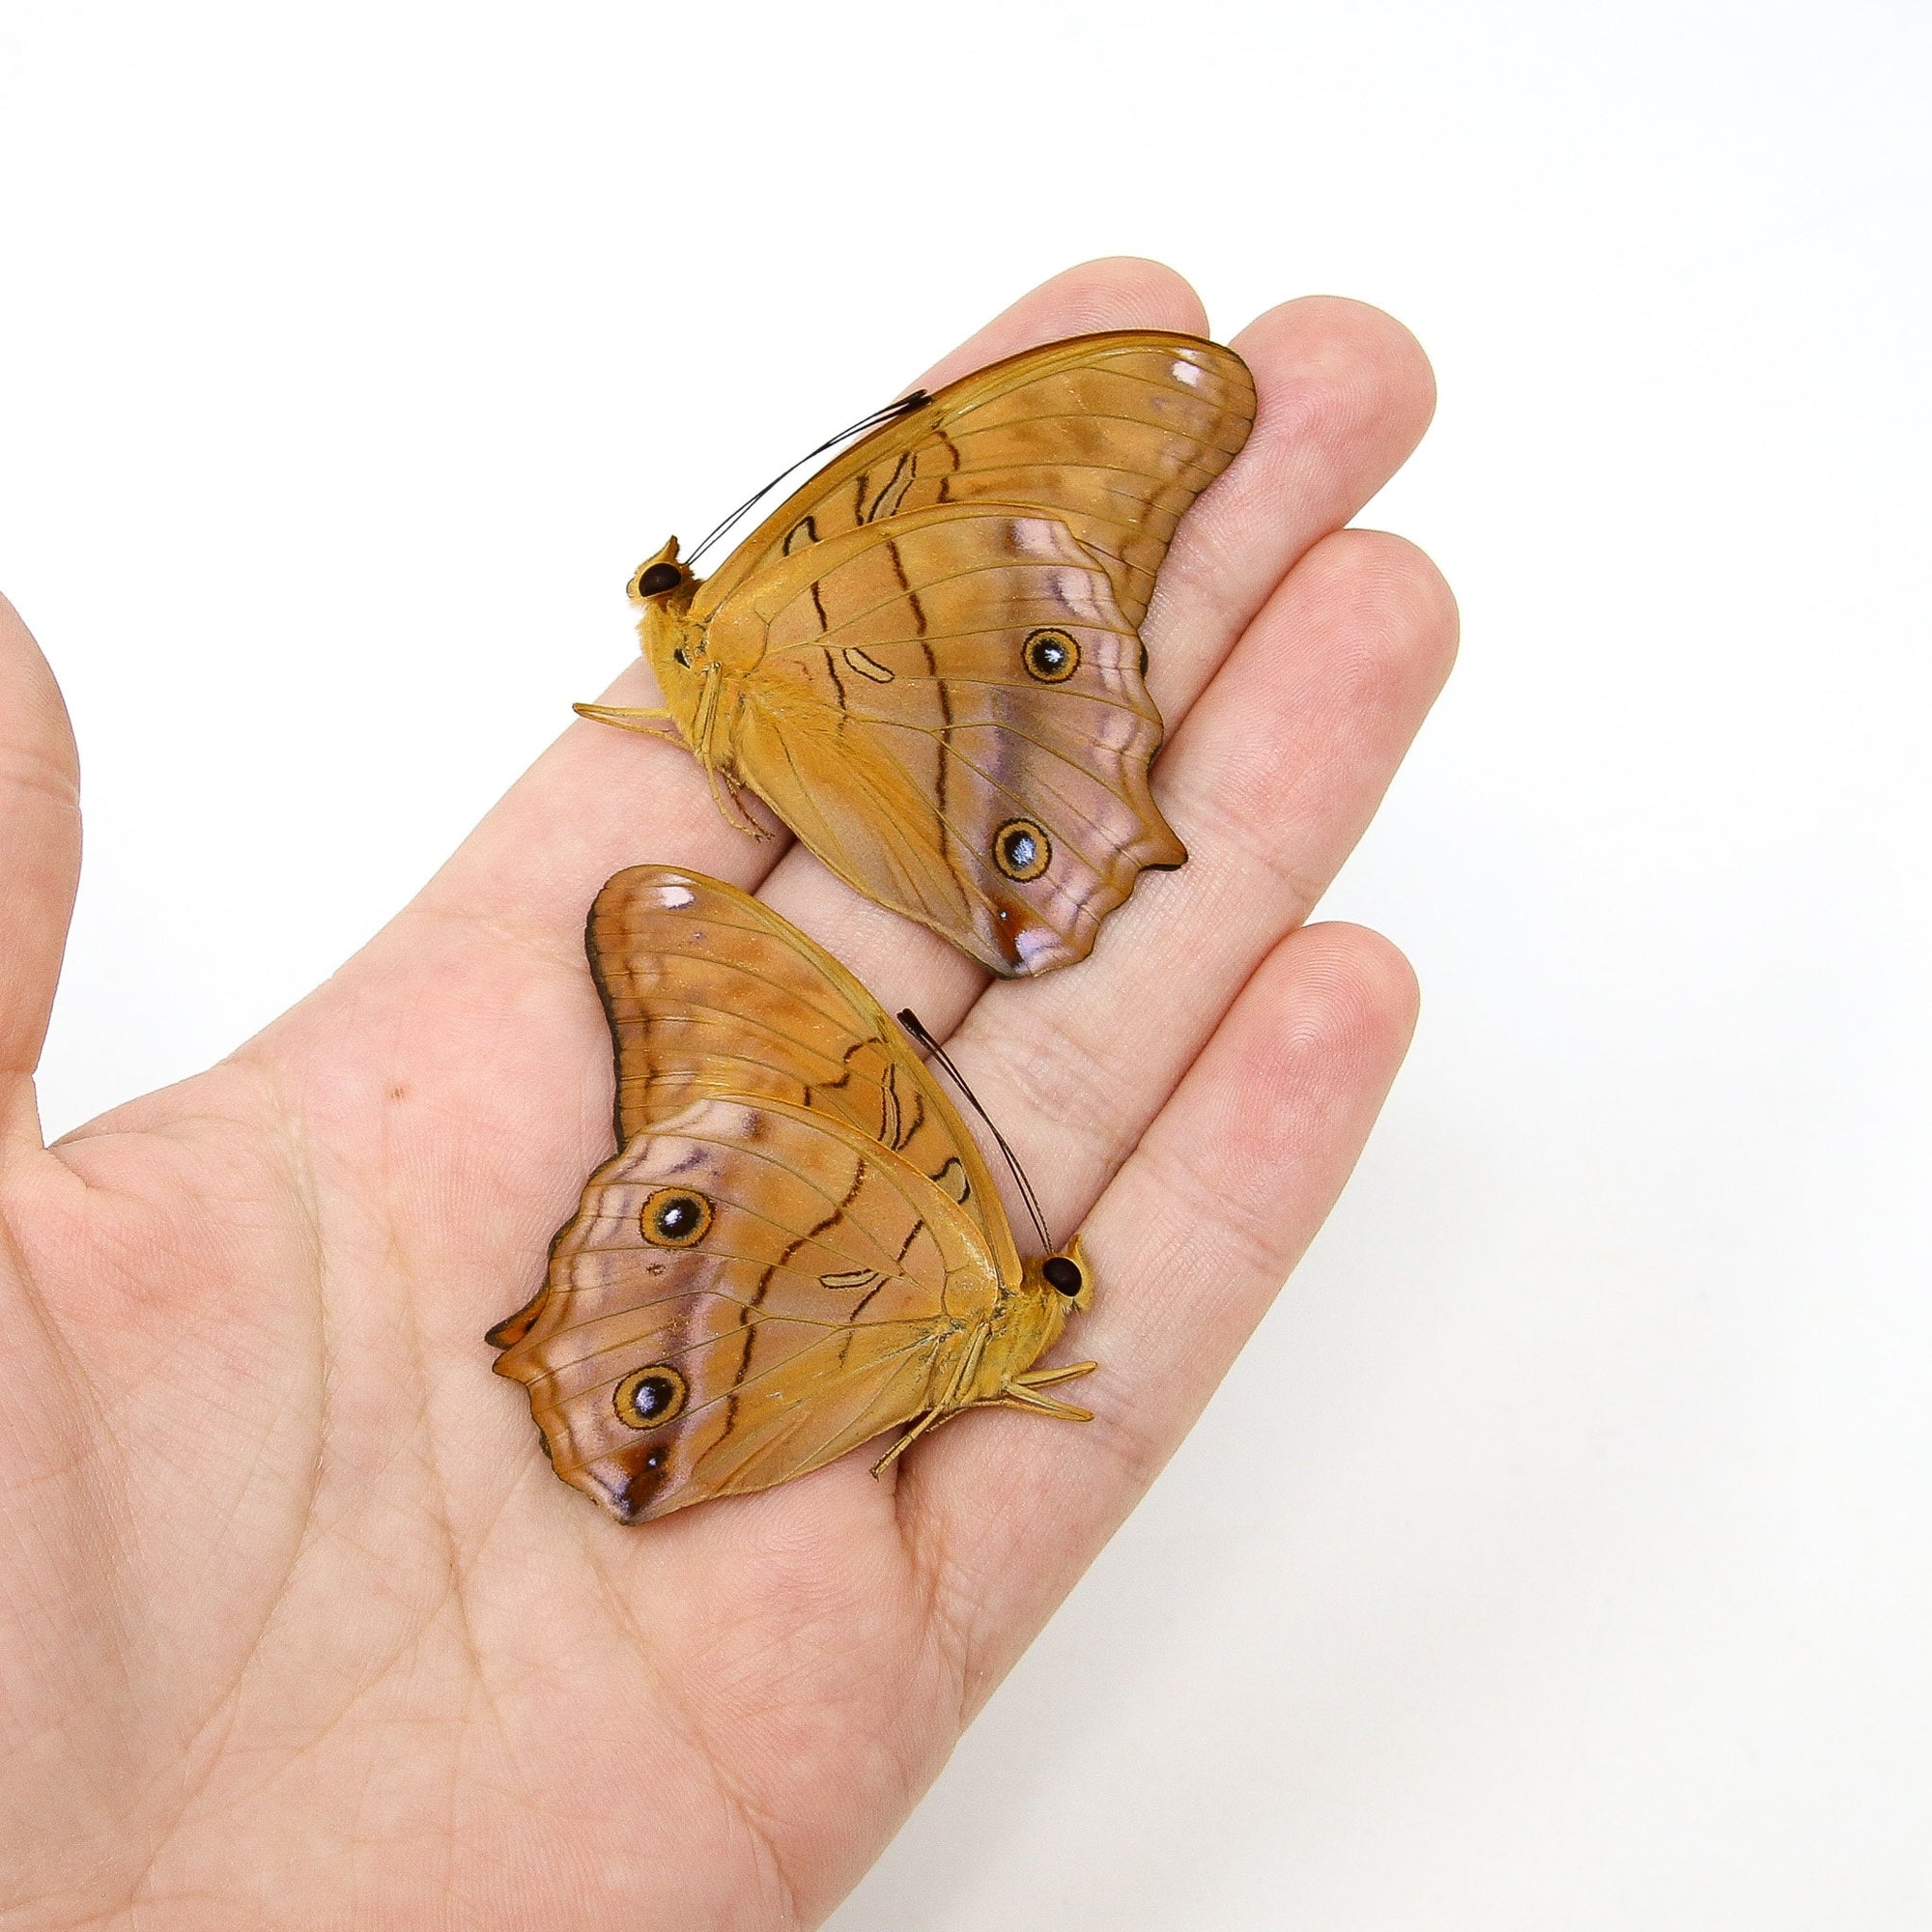 Two (2) Vindula arsinoe, The Cruiser, A1 Real Dry-Preserved Unmounted Butterflies, Entomology Taxidermy Specimens